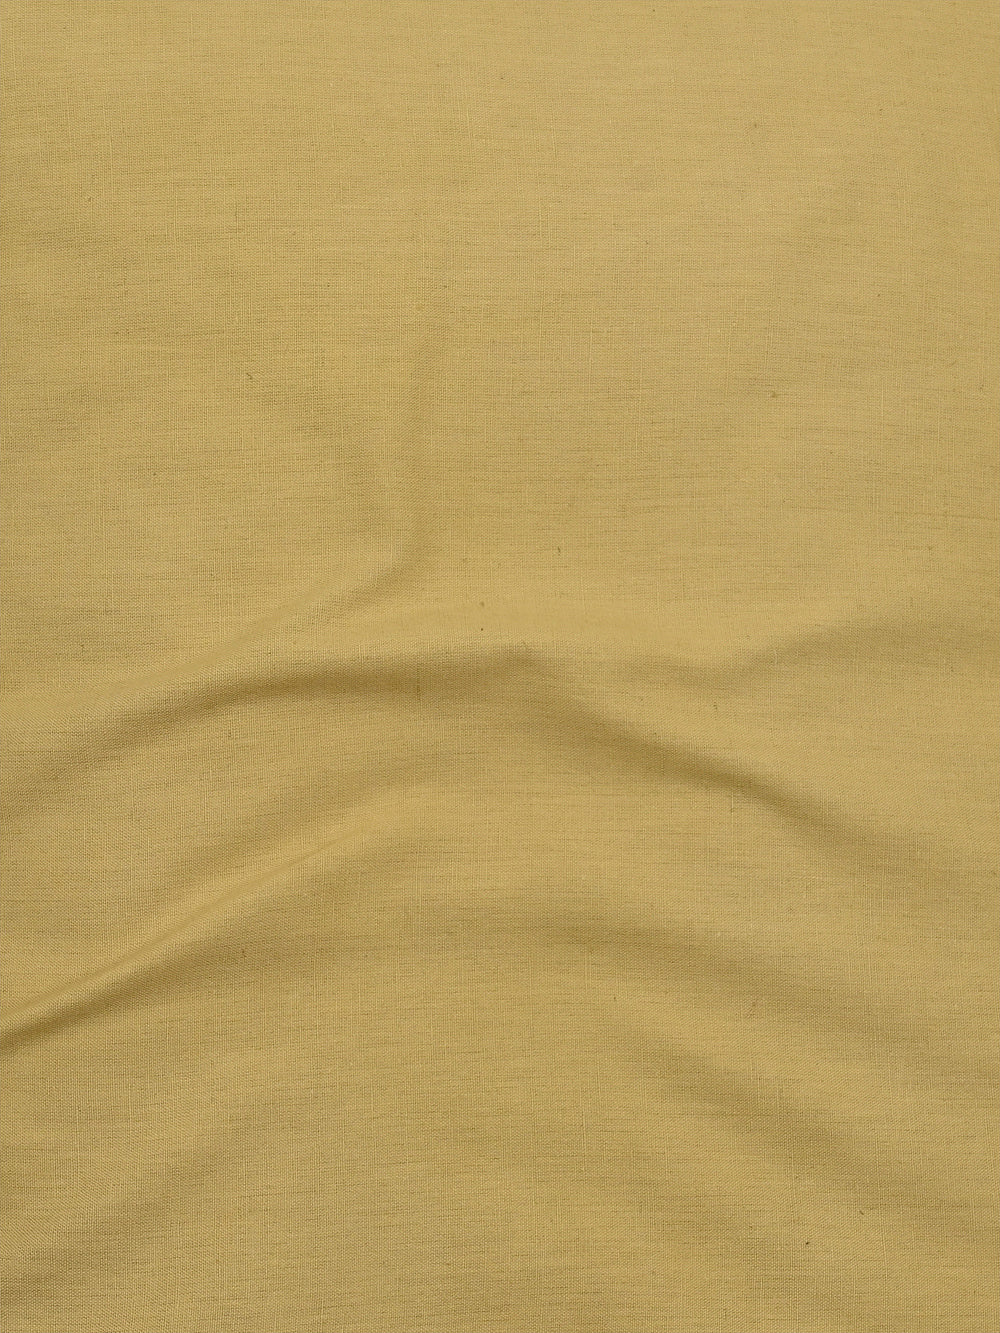 CF-158 Shade Solid Dyed Woven Cotton Flex Fabric